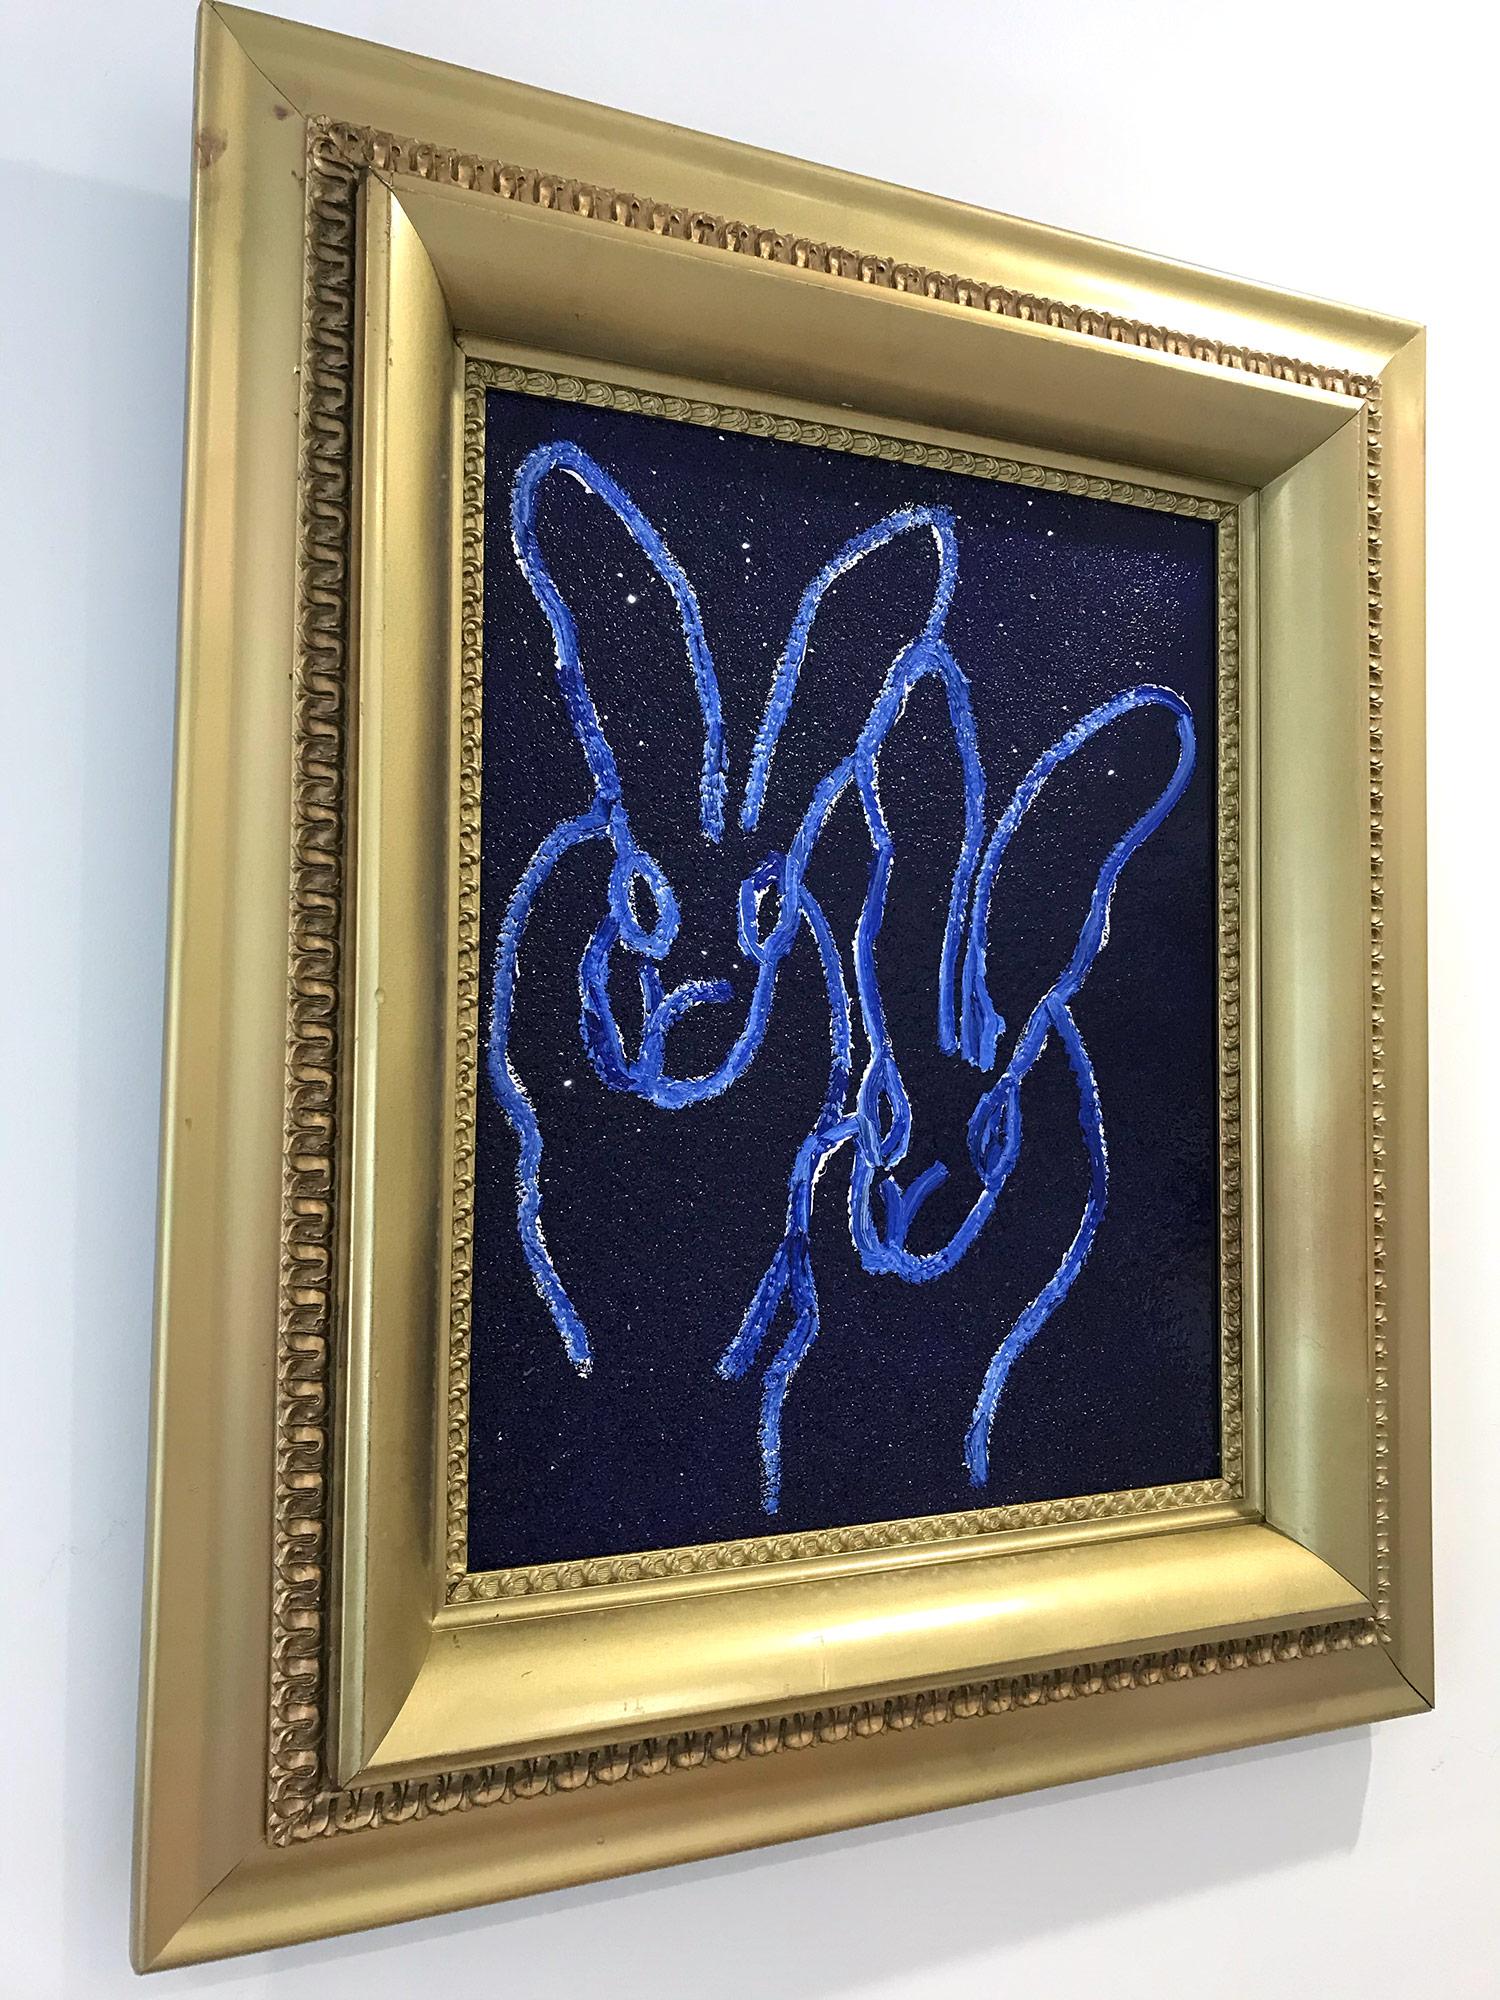 A wonderful composition of one of Slonem's most iconic subjects, Bunnies. This piece depicts a gestural figure of 2 white bunnies on an ultramarine blue background with thick use of paint and diamond dust. It is housed in a wonderful antique 19th